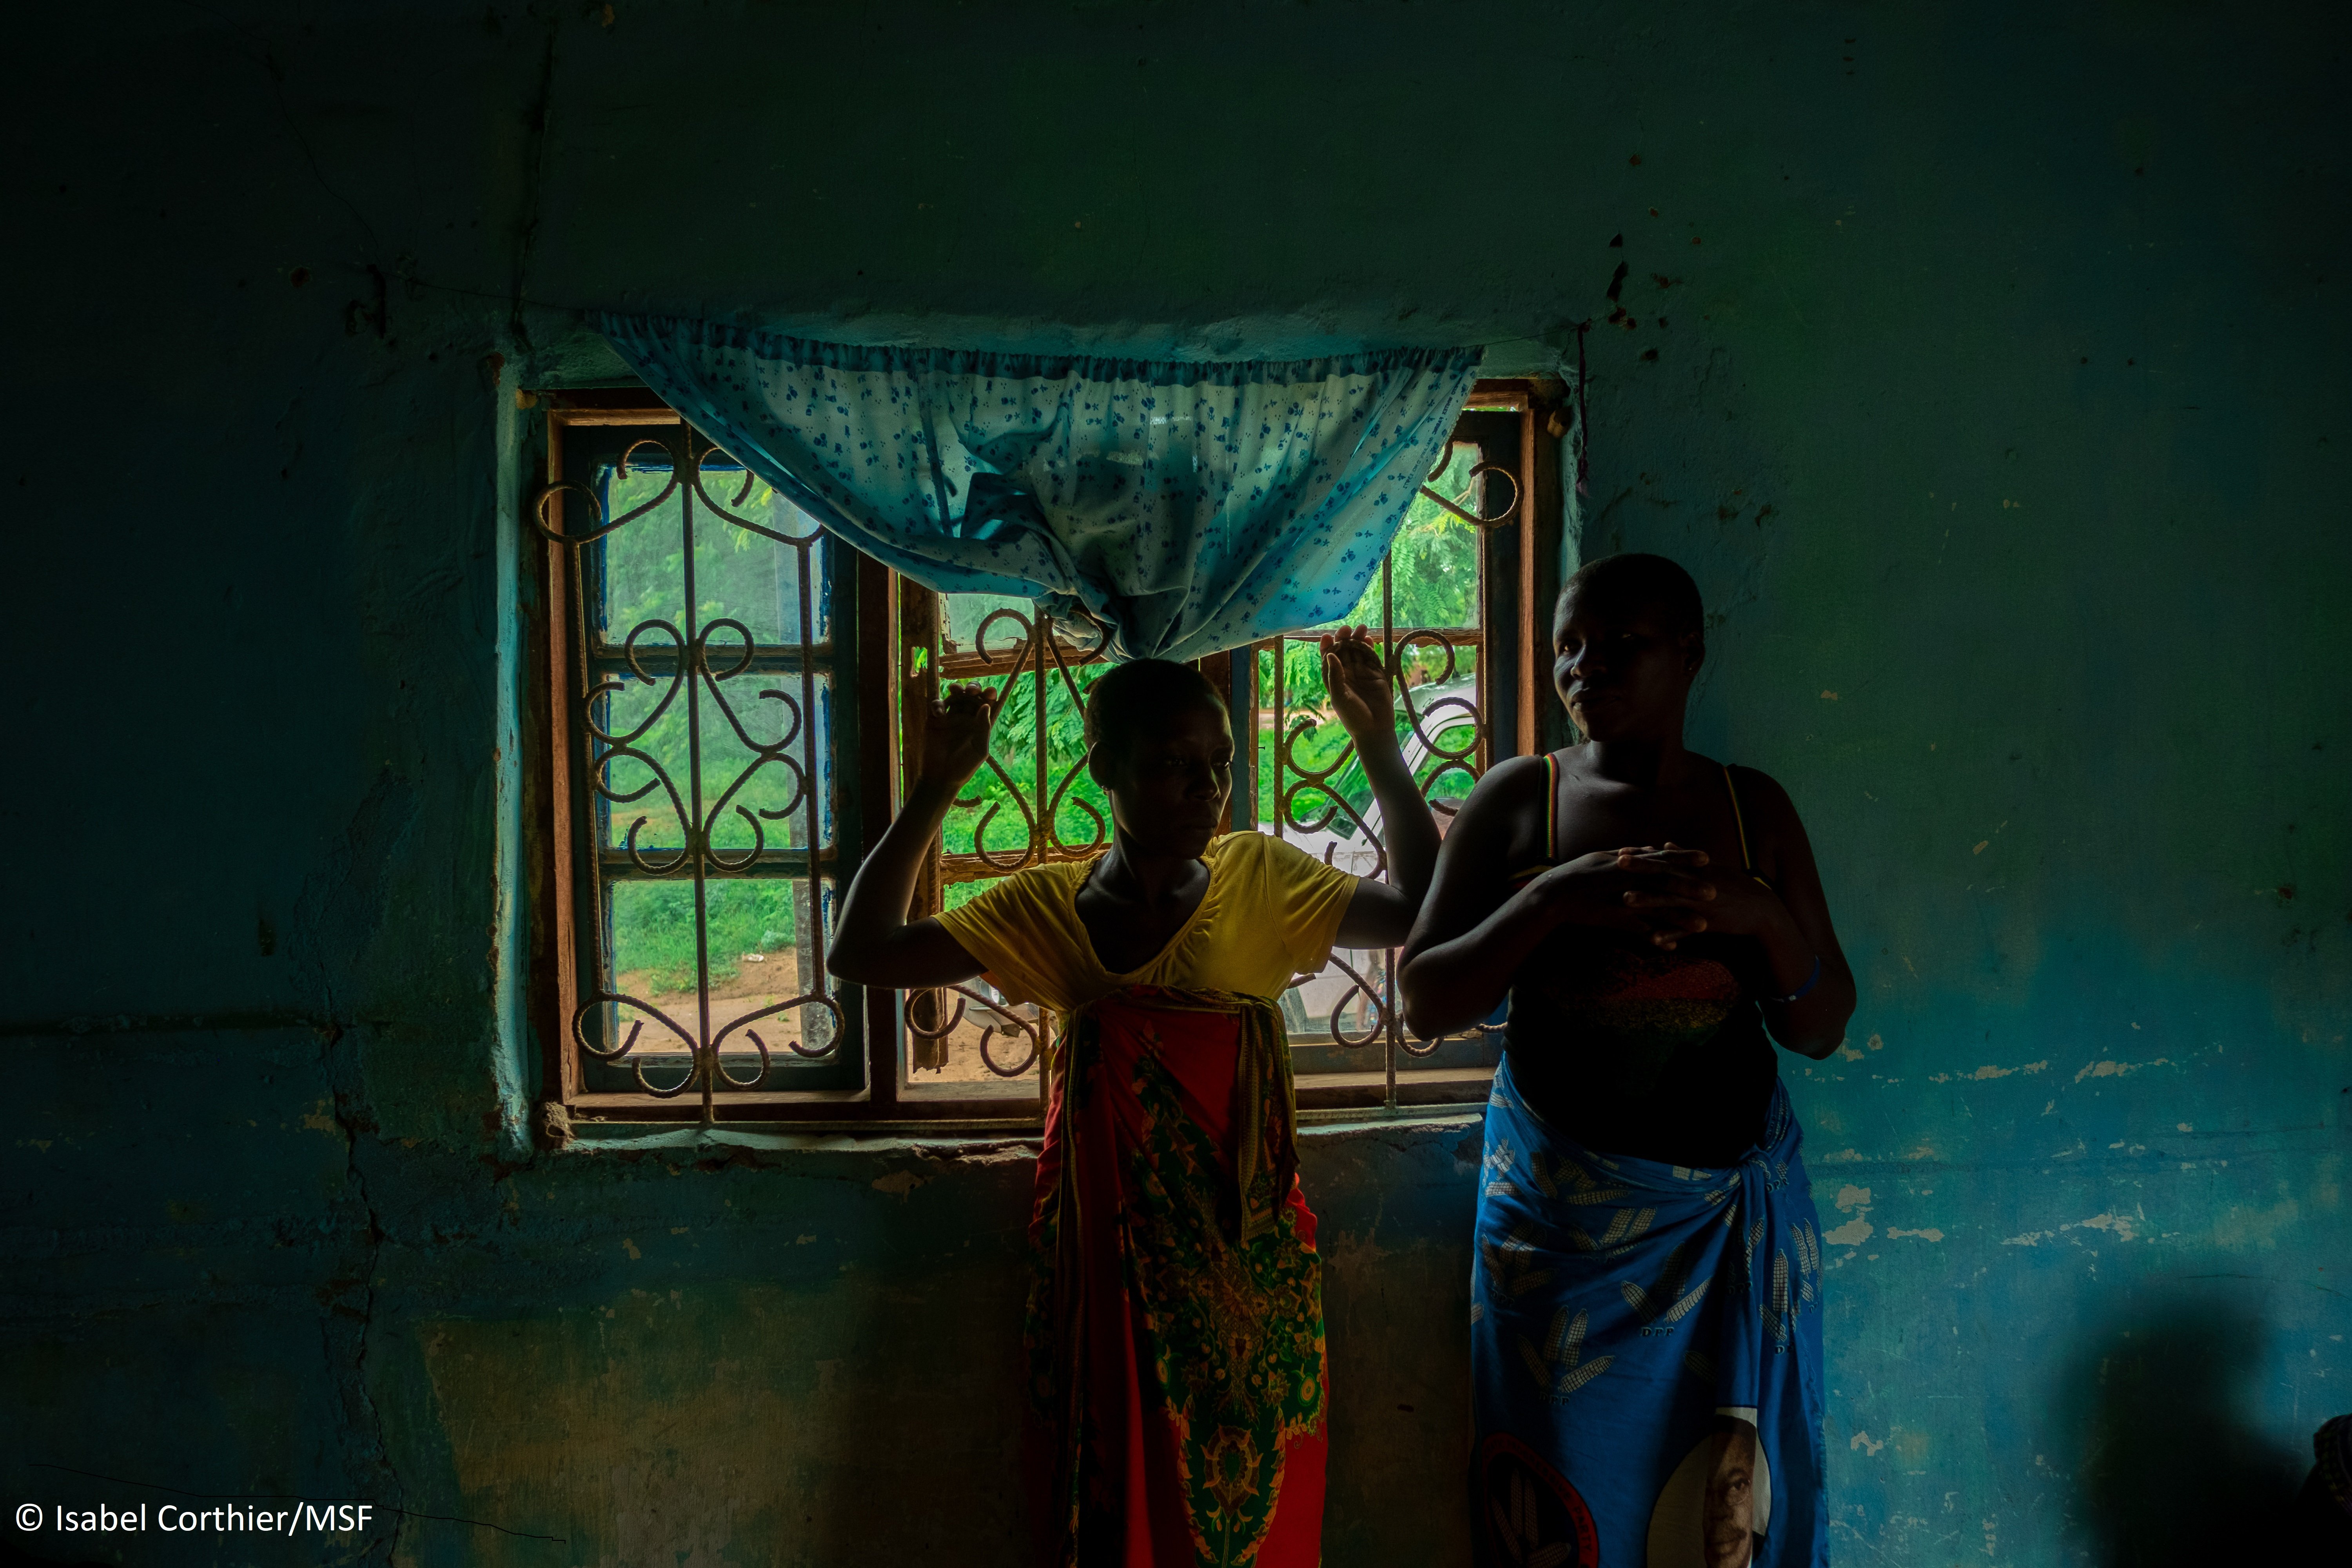 Sex workers during an outreach clinic conducted by MSF's sex worker project in a rented room in Nsanje, Malawi. Photo by Isabel Corthier/MSF.